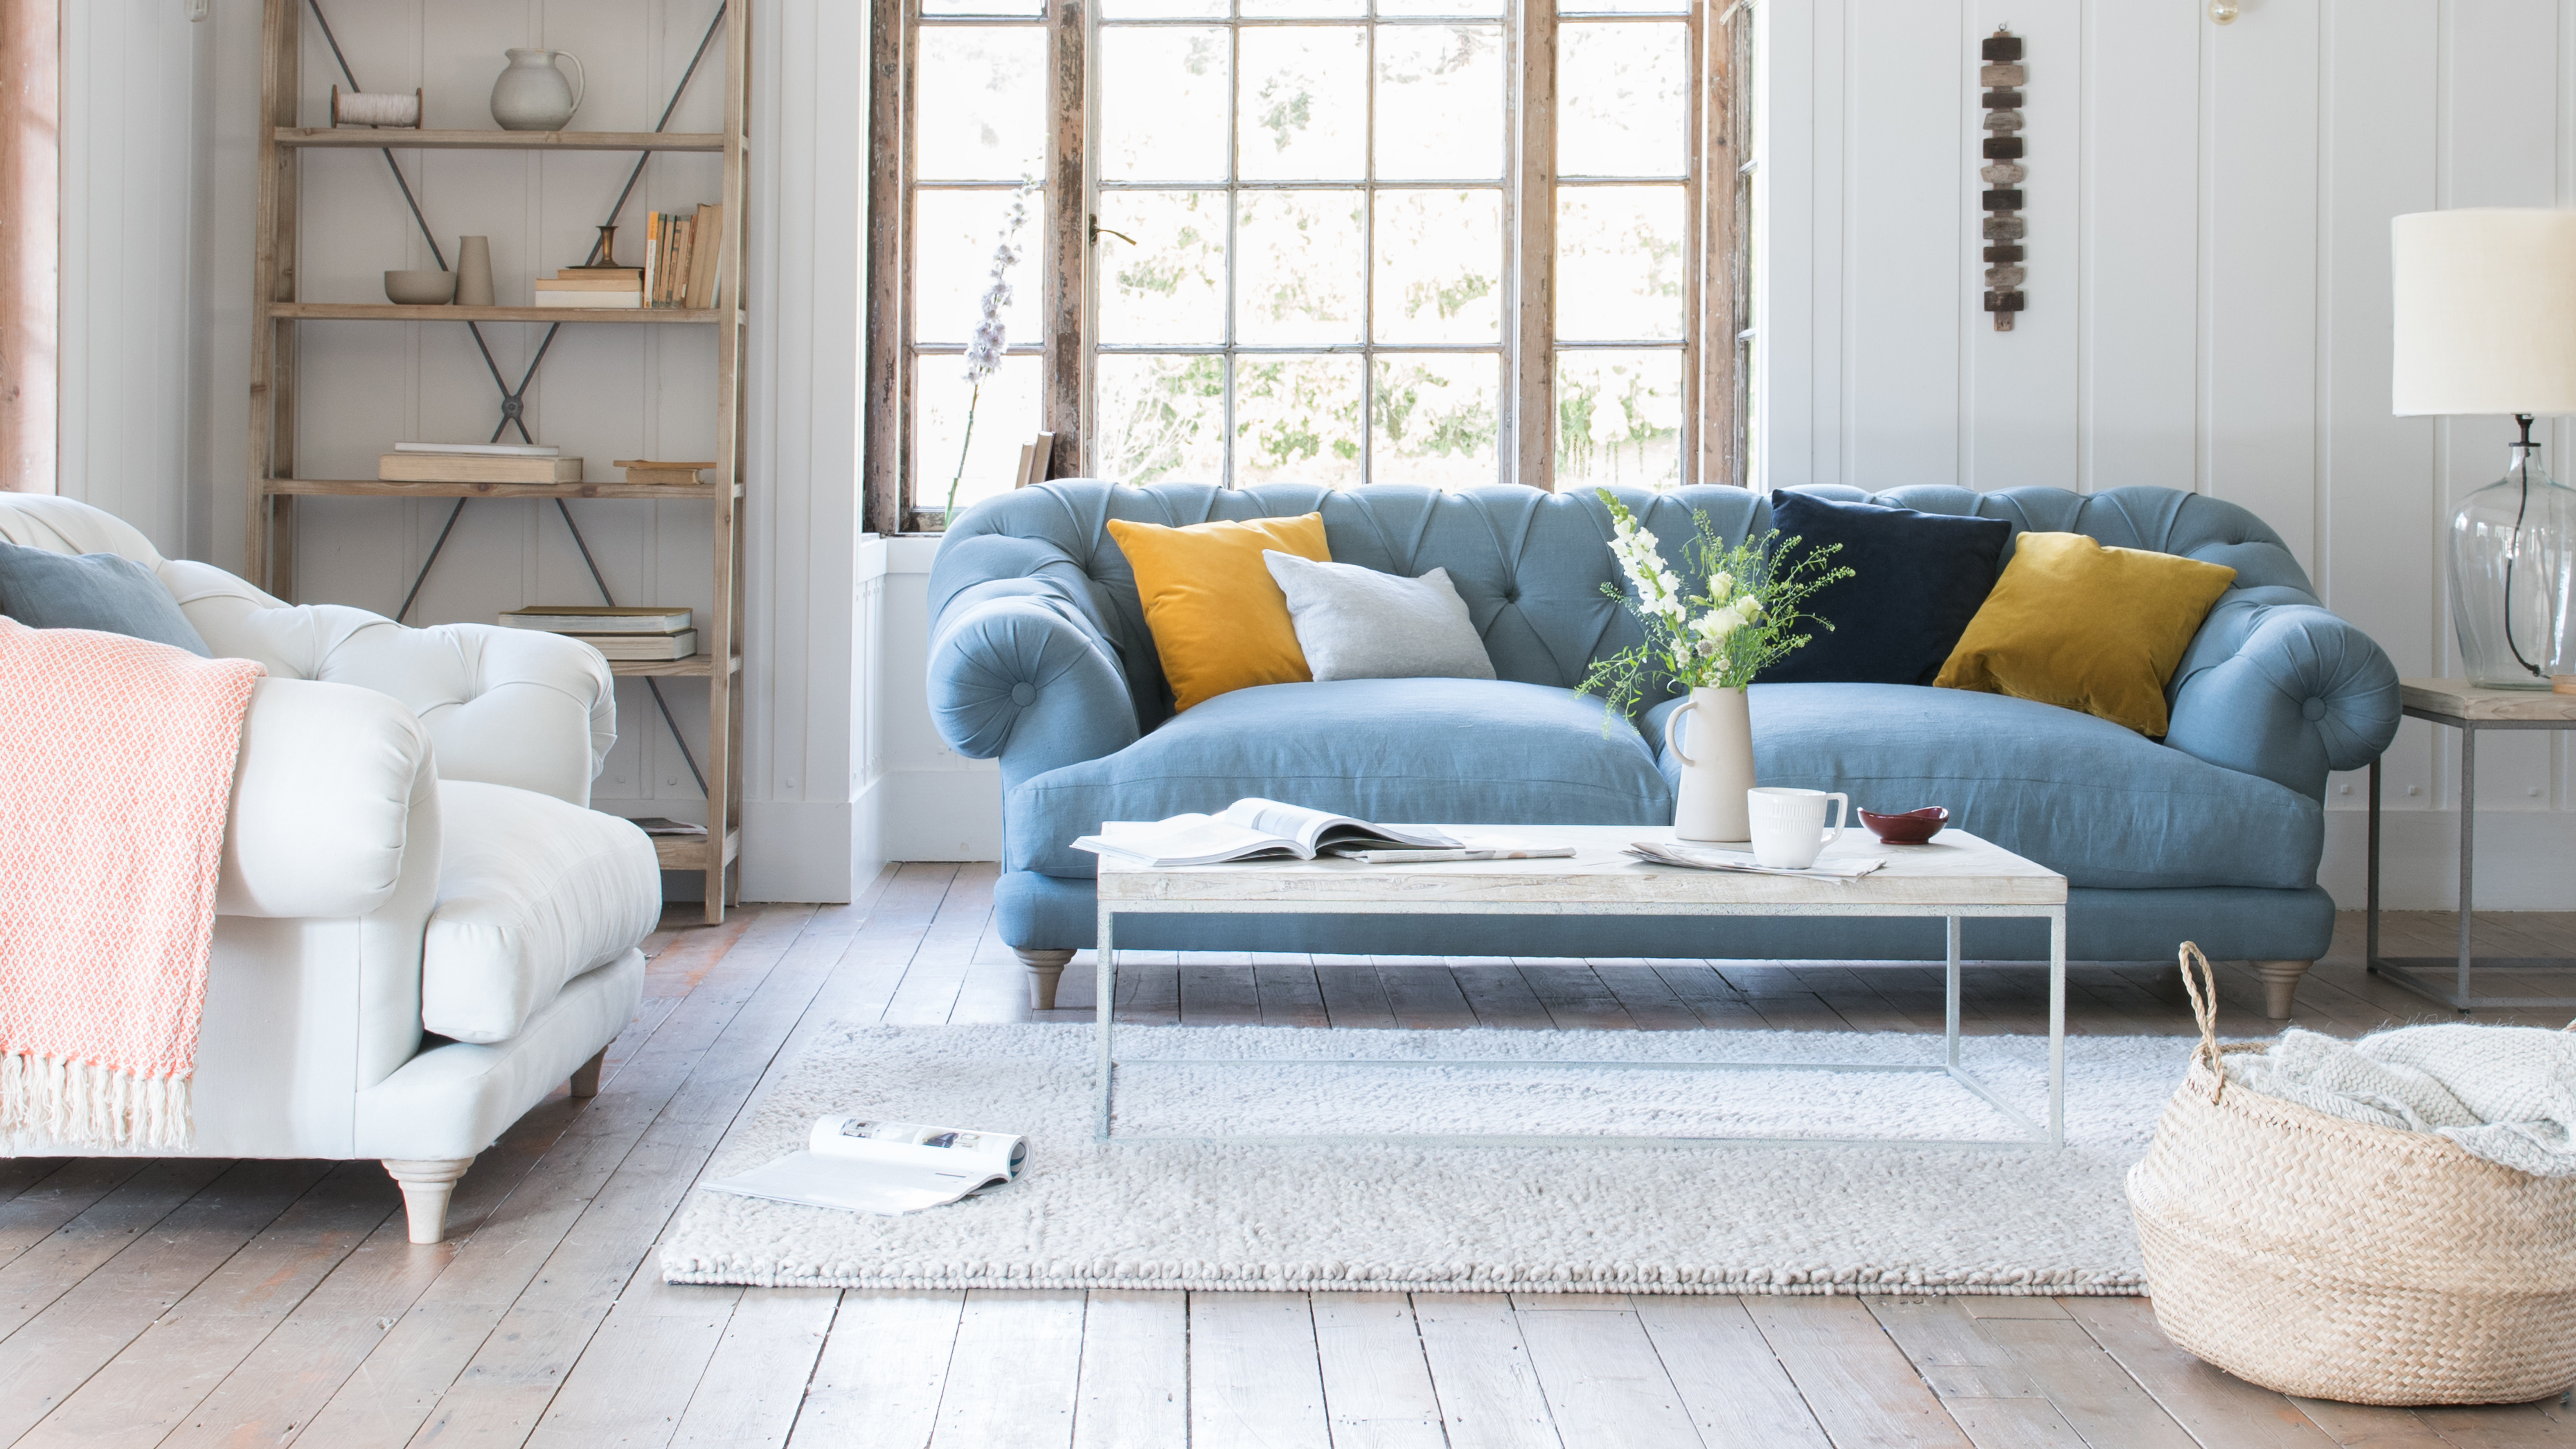 How to choose a sofa or armchair | Real Homes